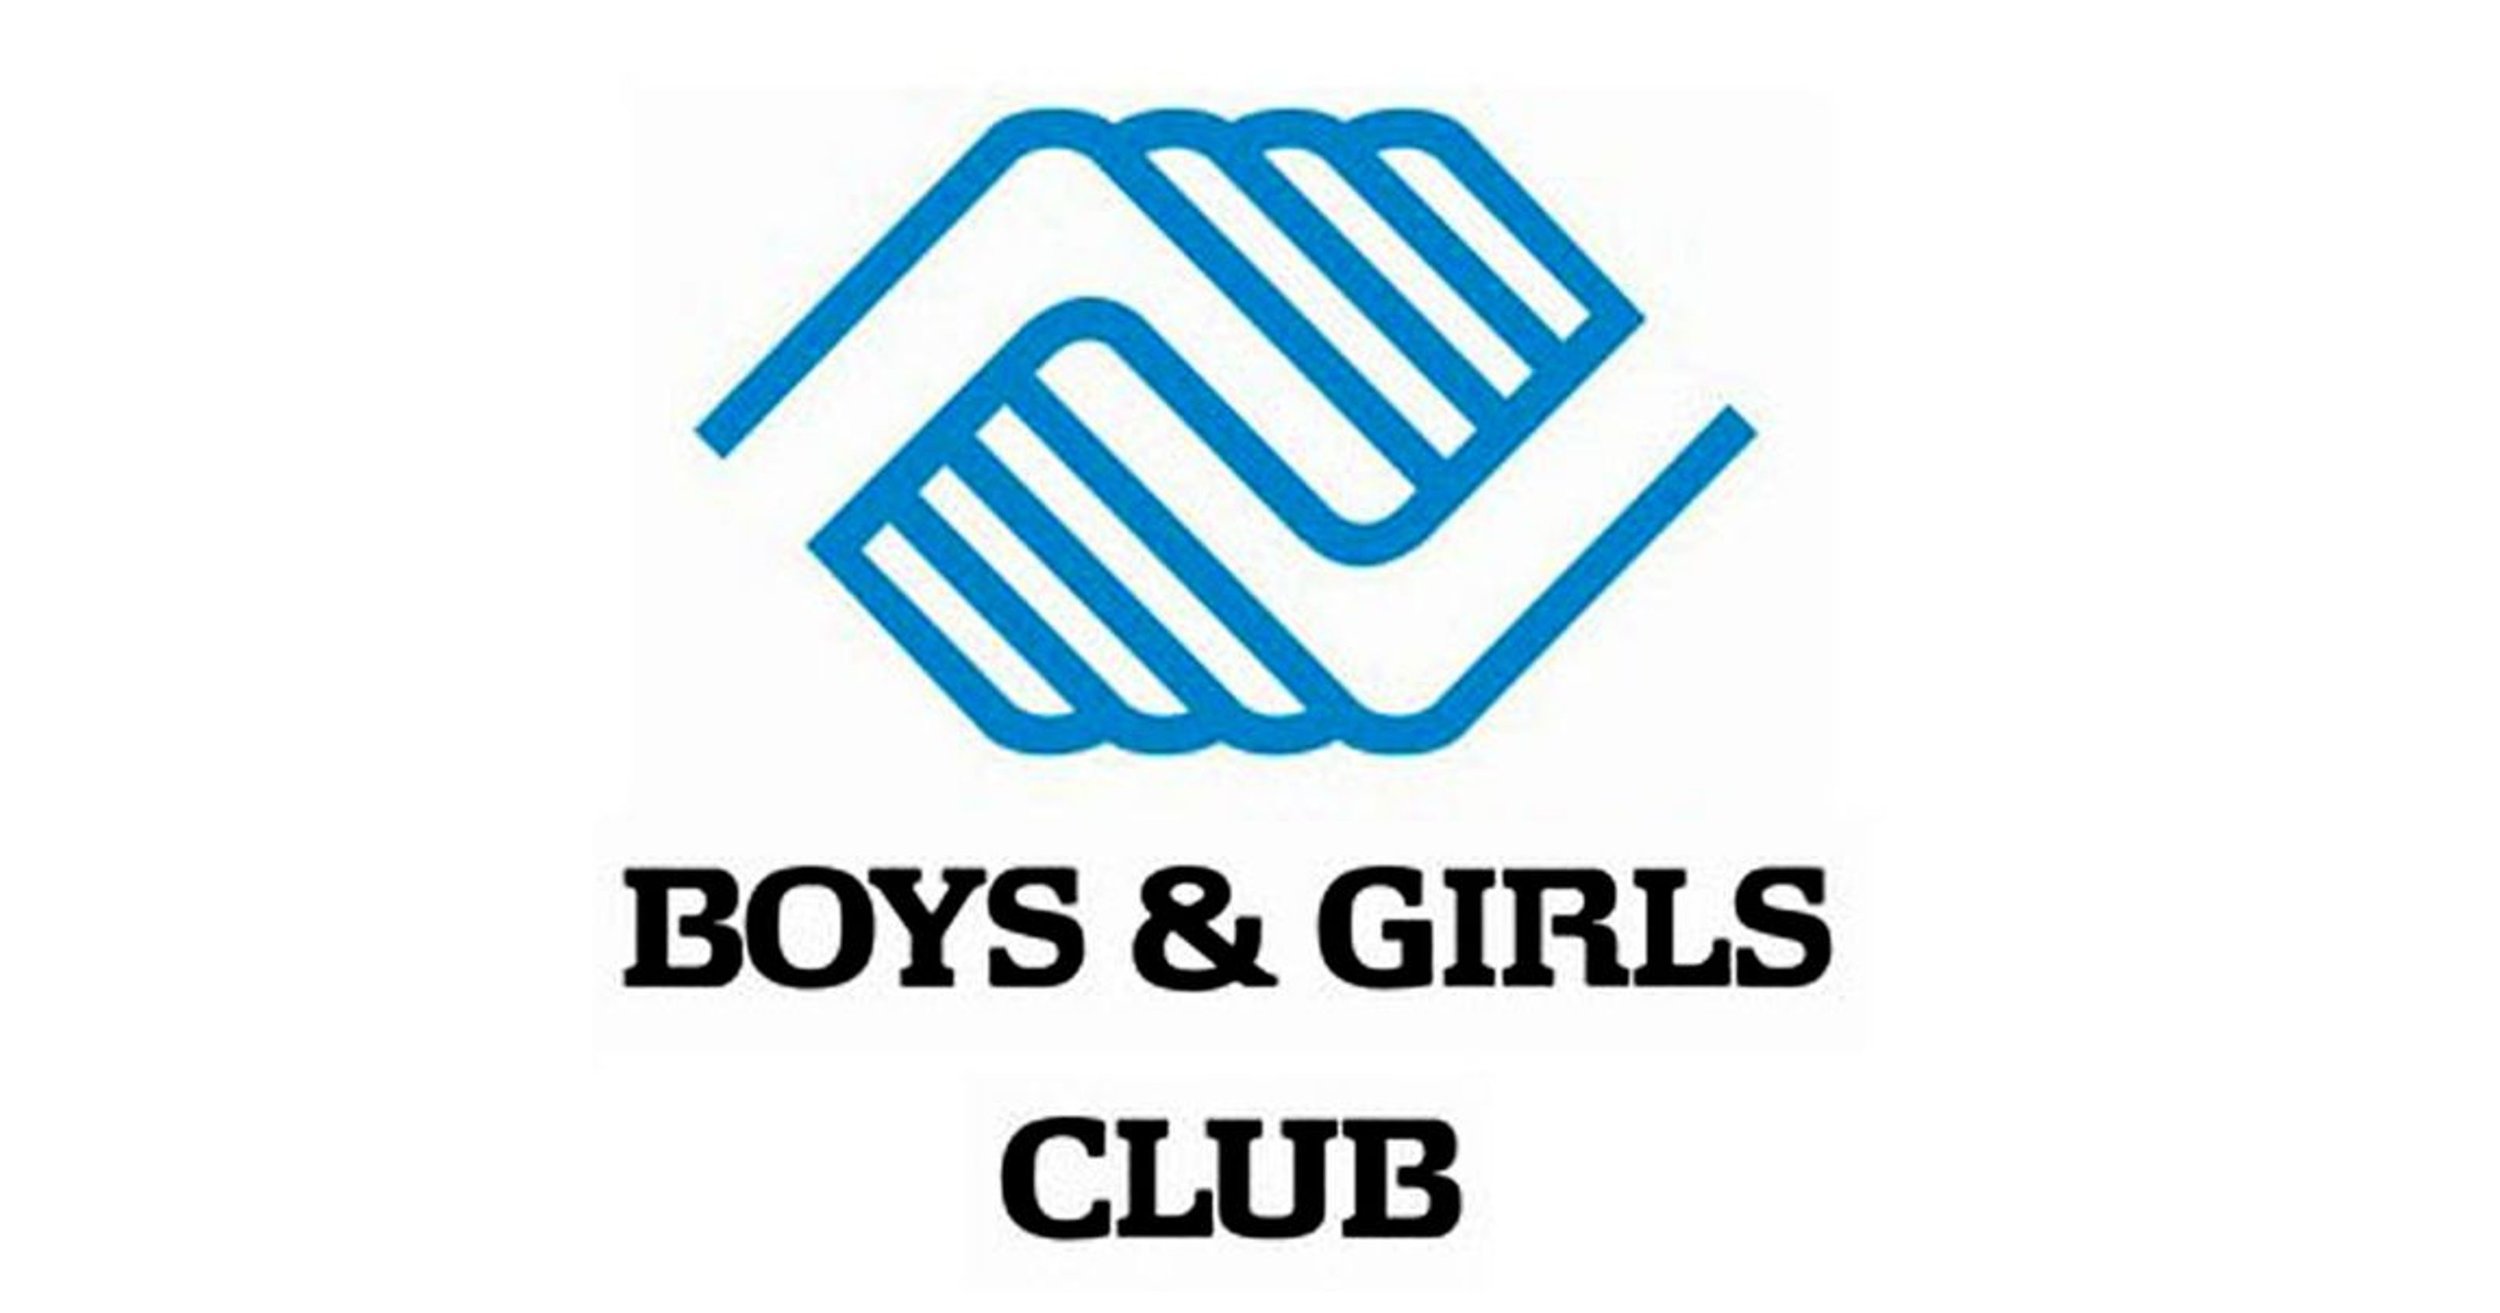 Boys and Girls Club of the San Luis Valley